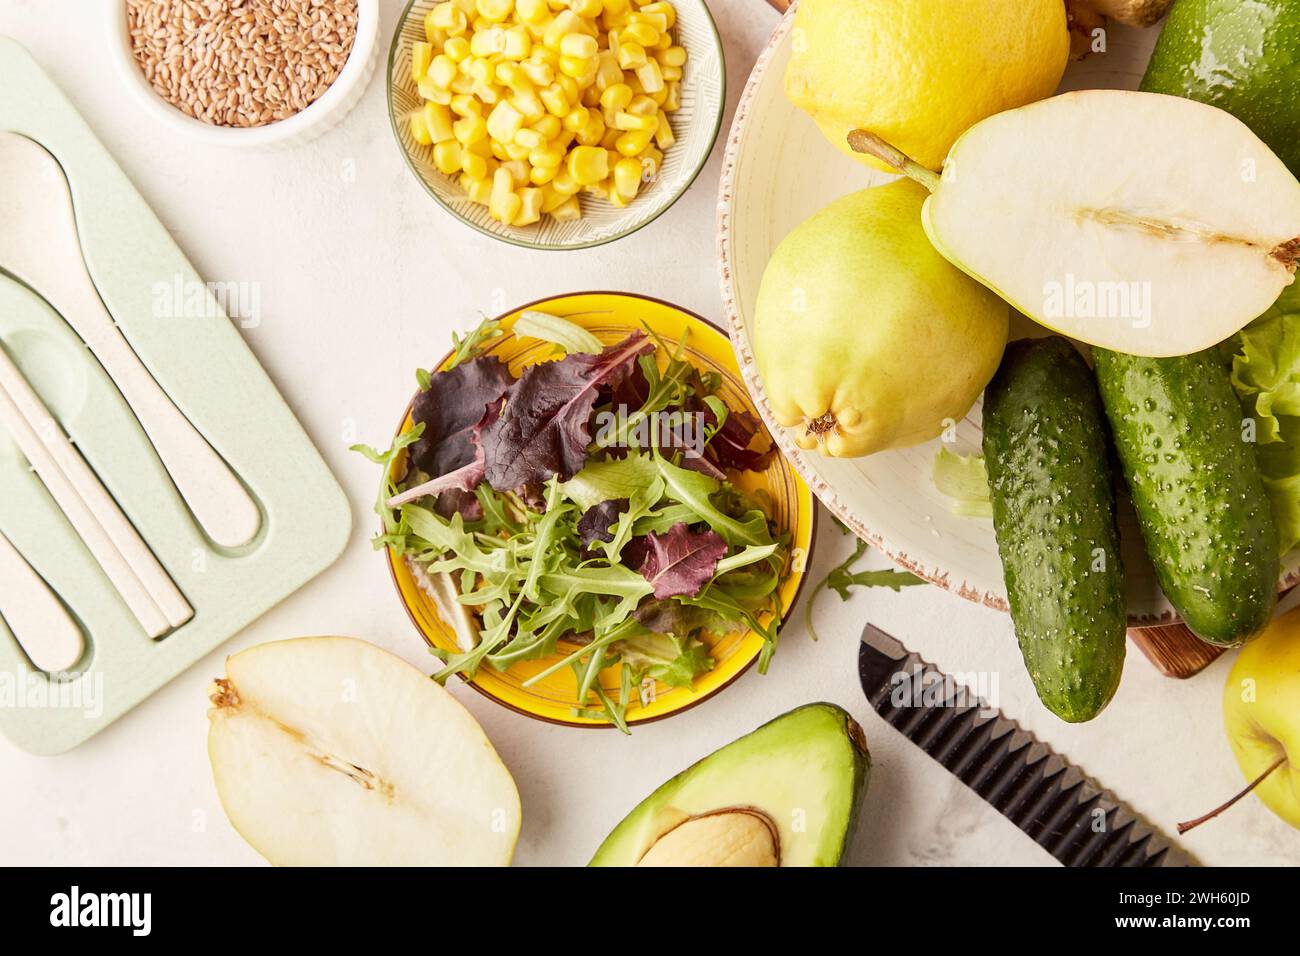 Healthy low fodmap, Mediterranean diet - vegetables, fruits, greens, flax seeds with cutlery. Plant based diet ingredients close up Stock Photo